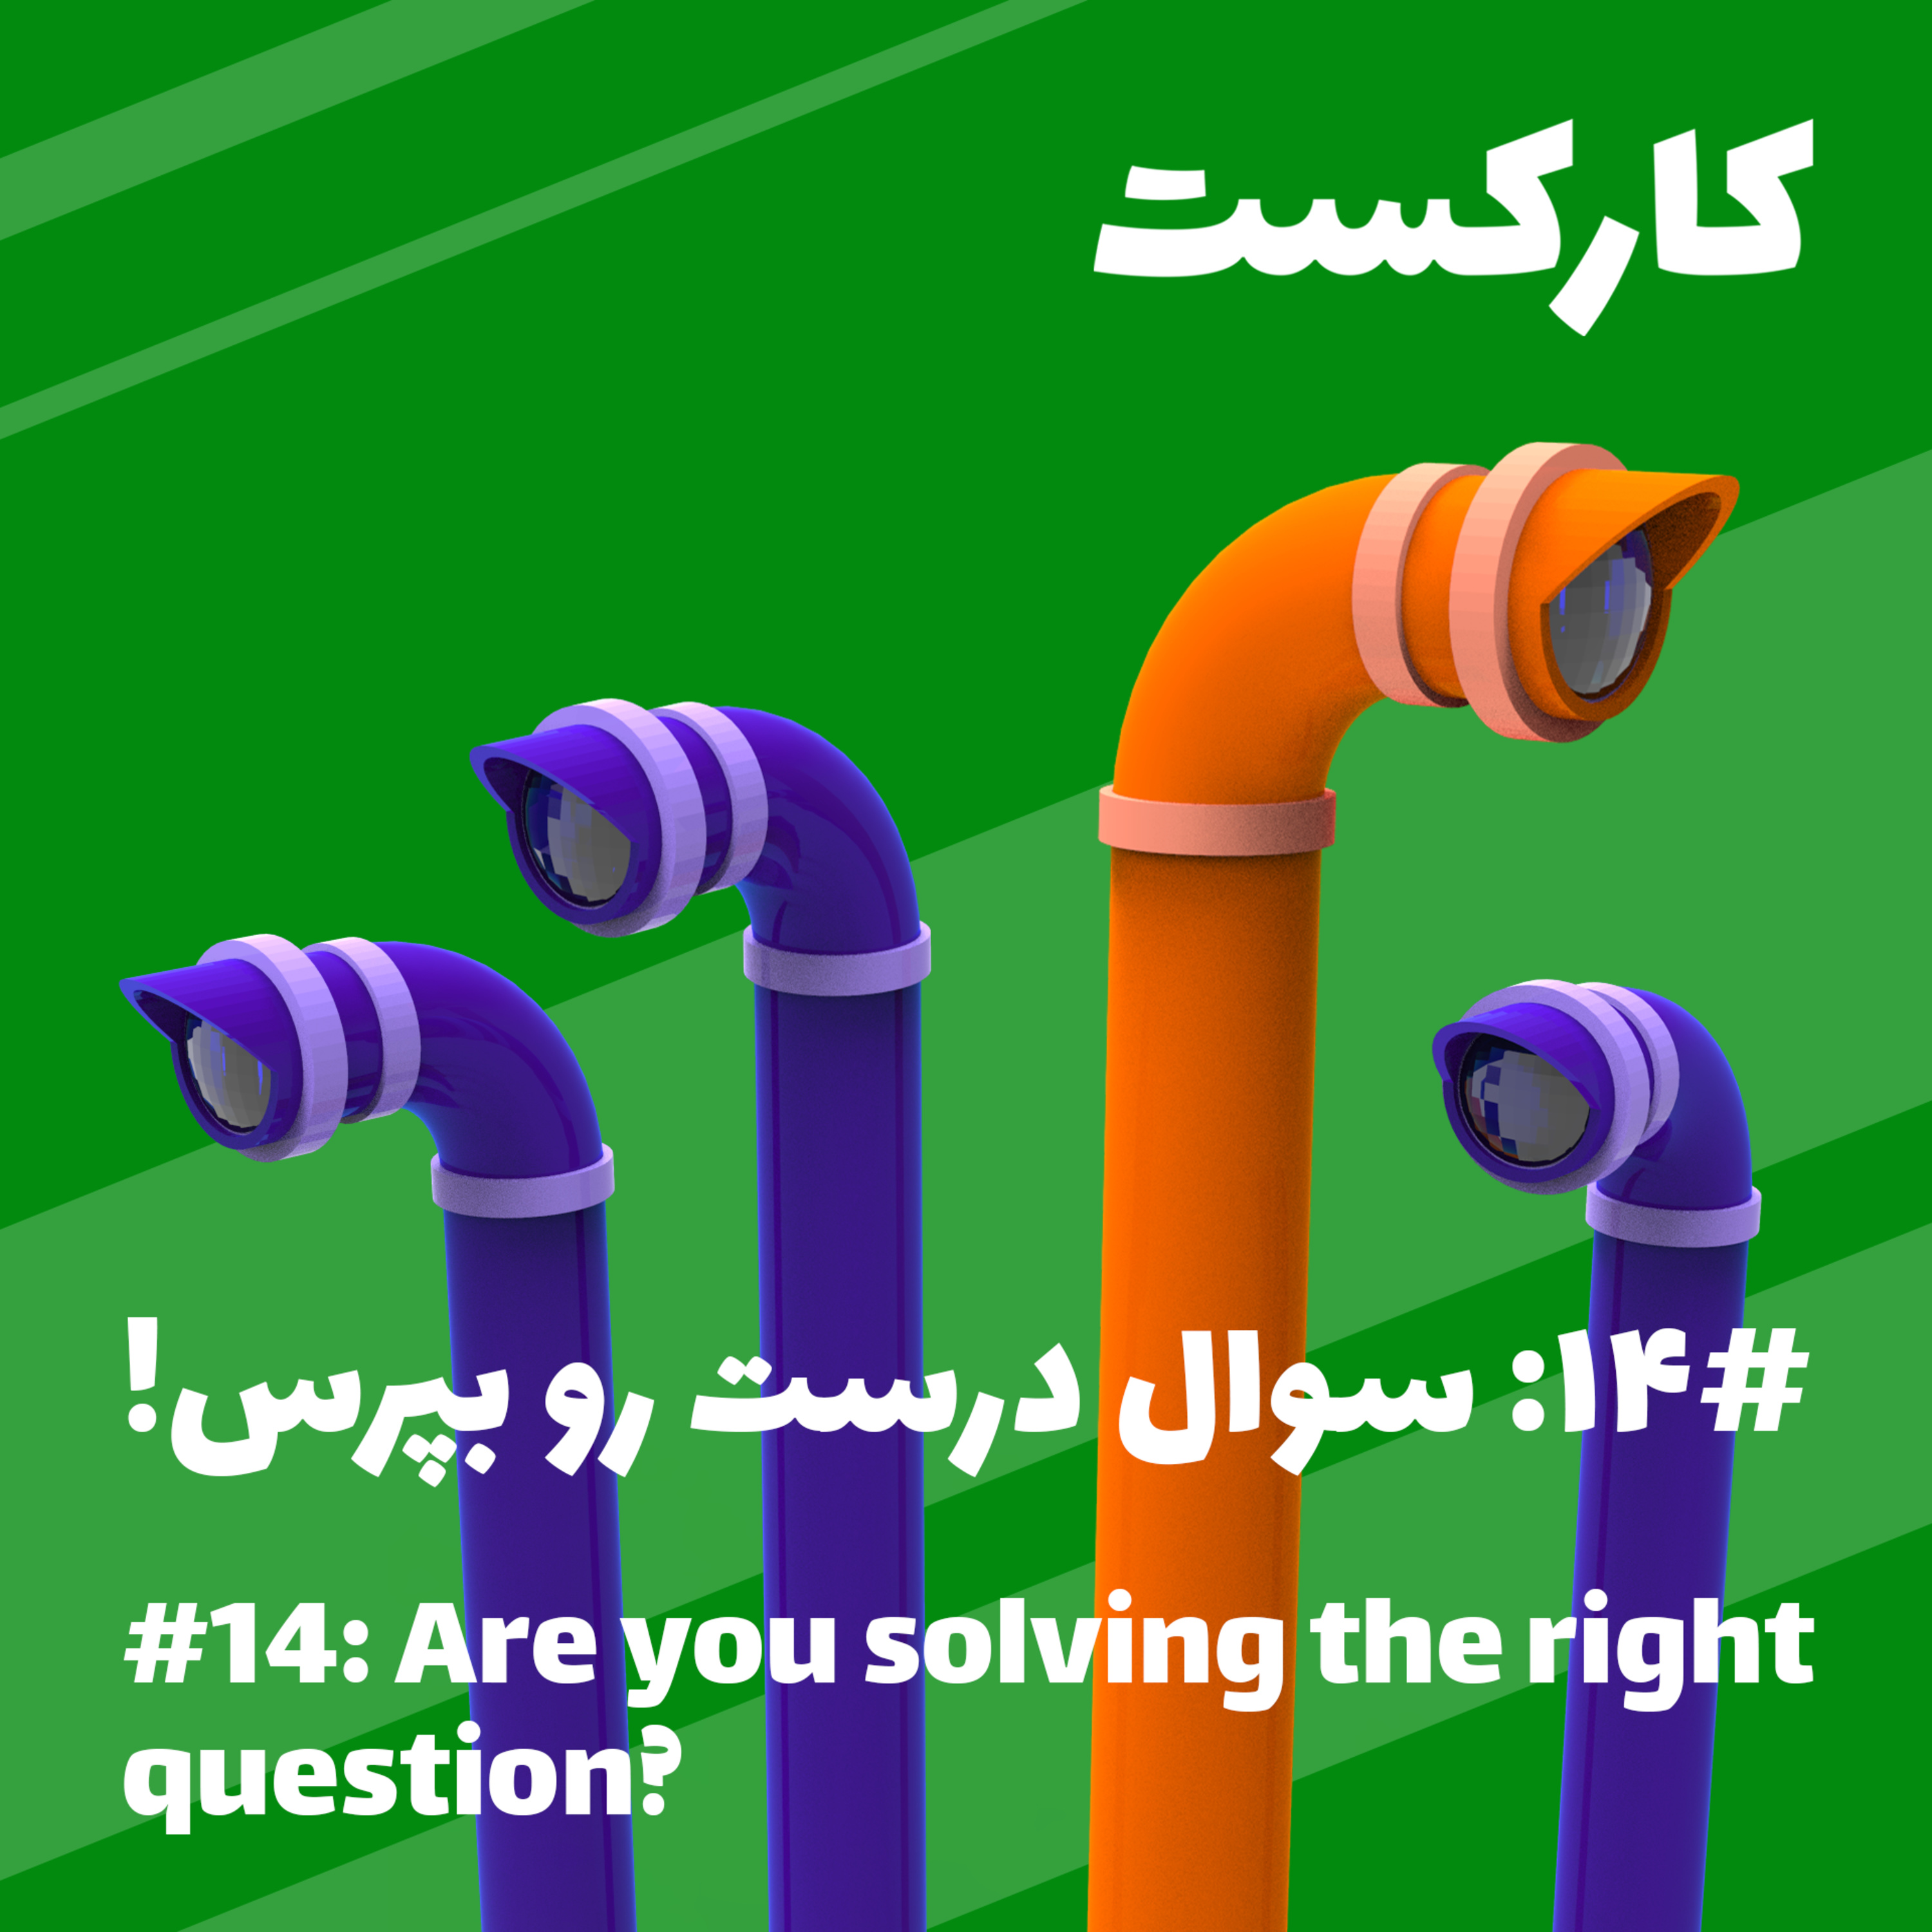 14: Are you solving the right question? - سوال درست رو بپرس